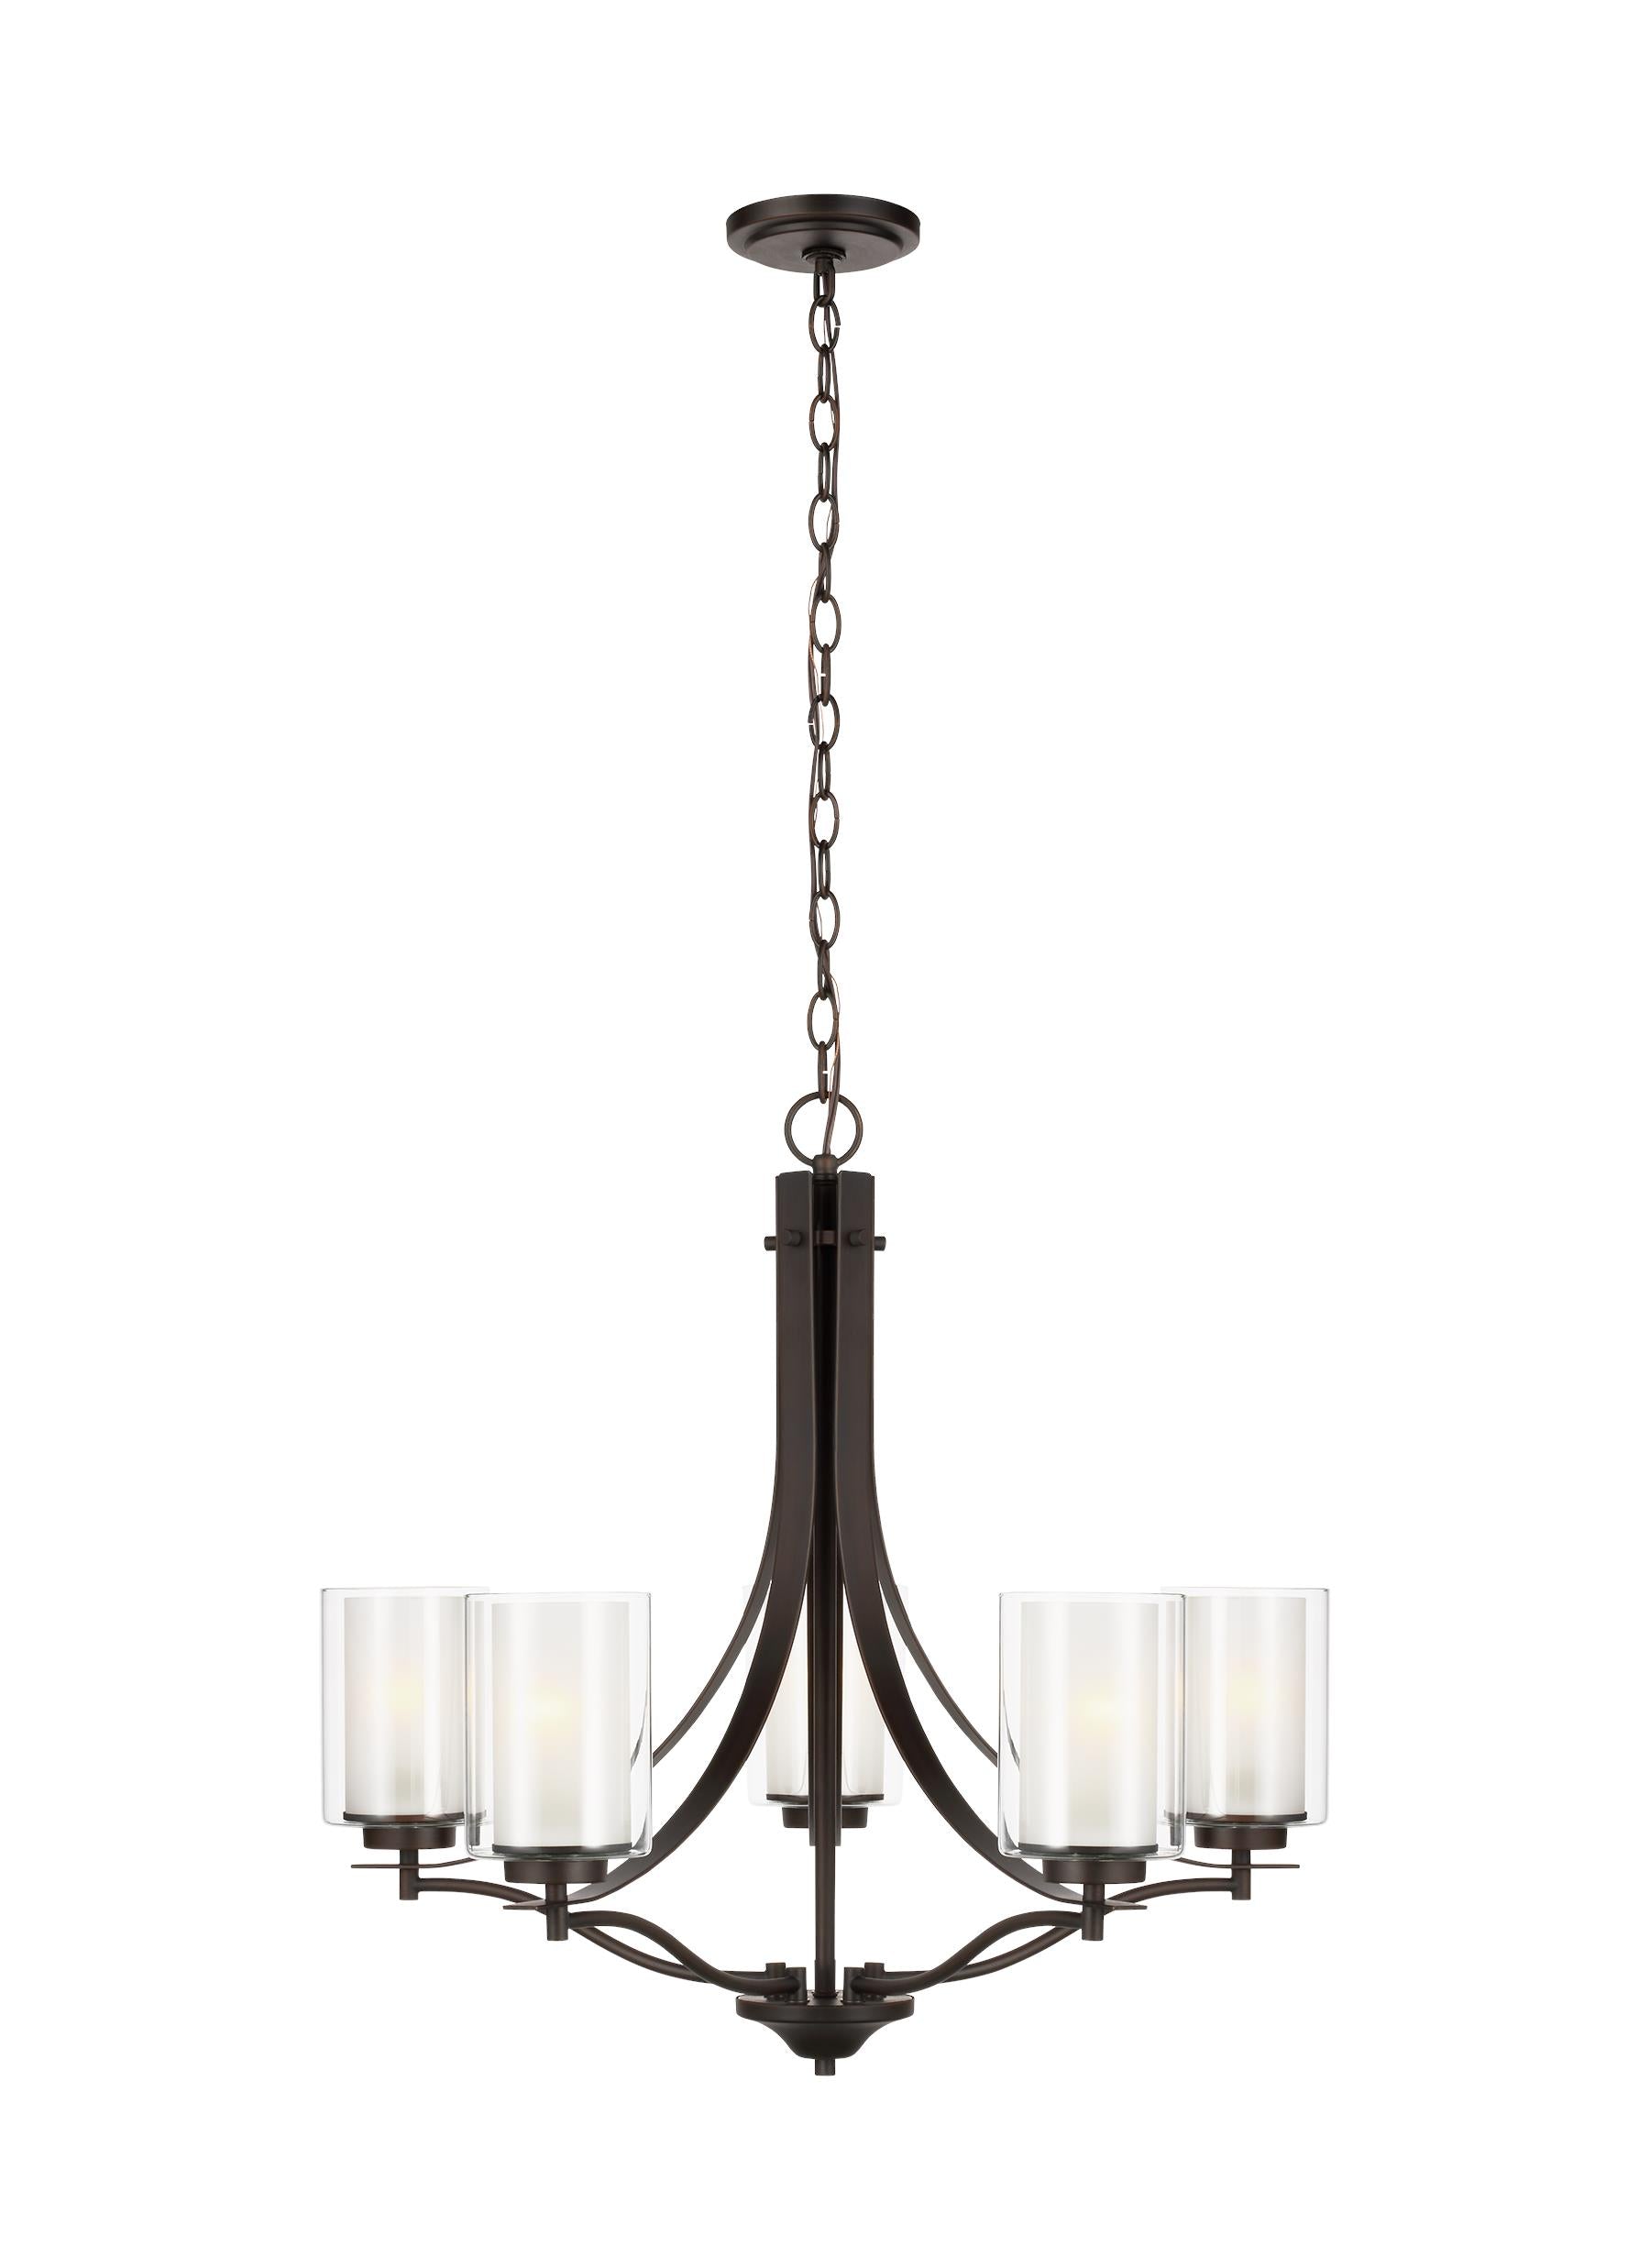 Elmwood Park traditional 5-light indoor dimmable ceiling chandelier pendant light in bronze finish with satin etched glass...